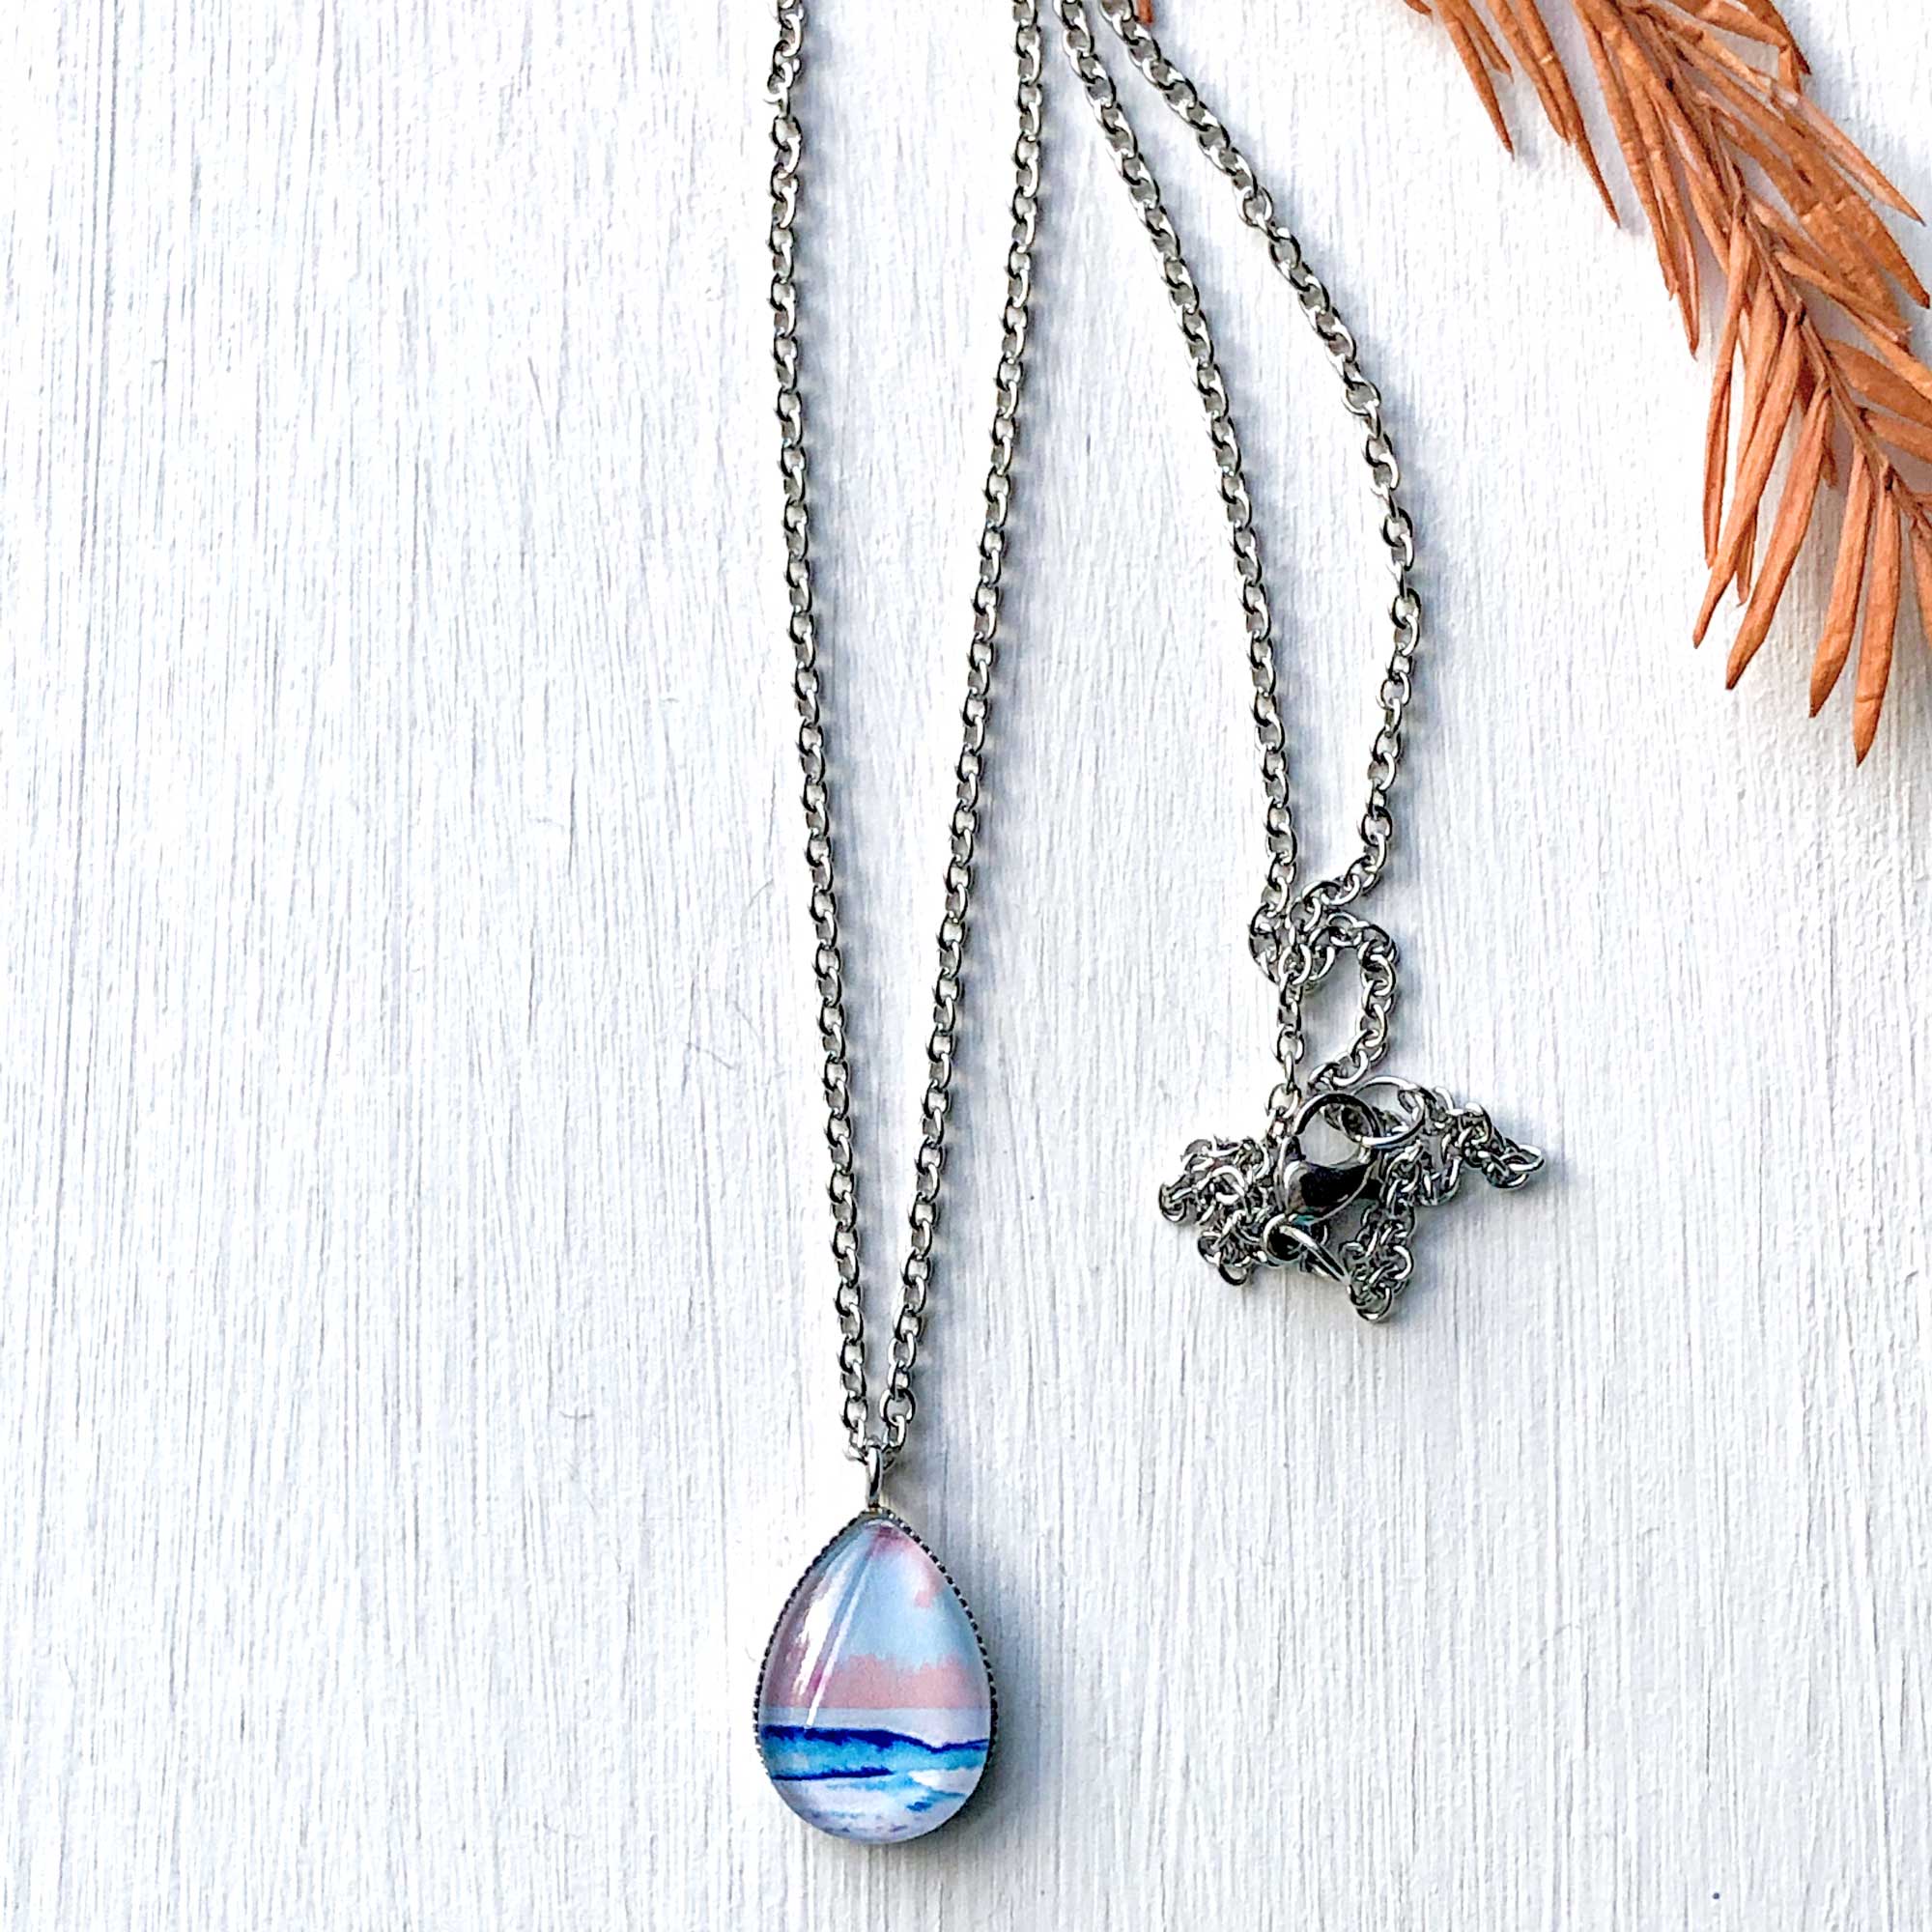 Candy Seascape - Stainless Steel Teardrop Necklace or Set